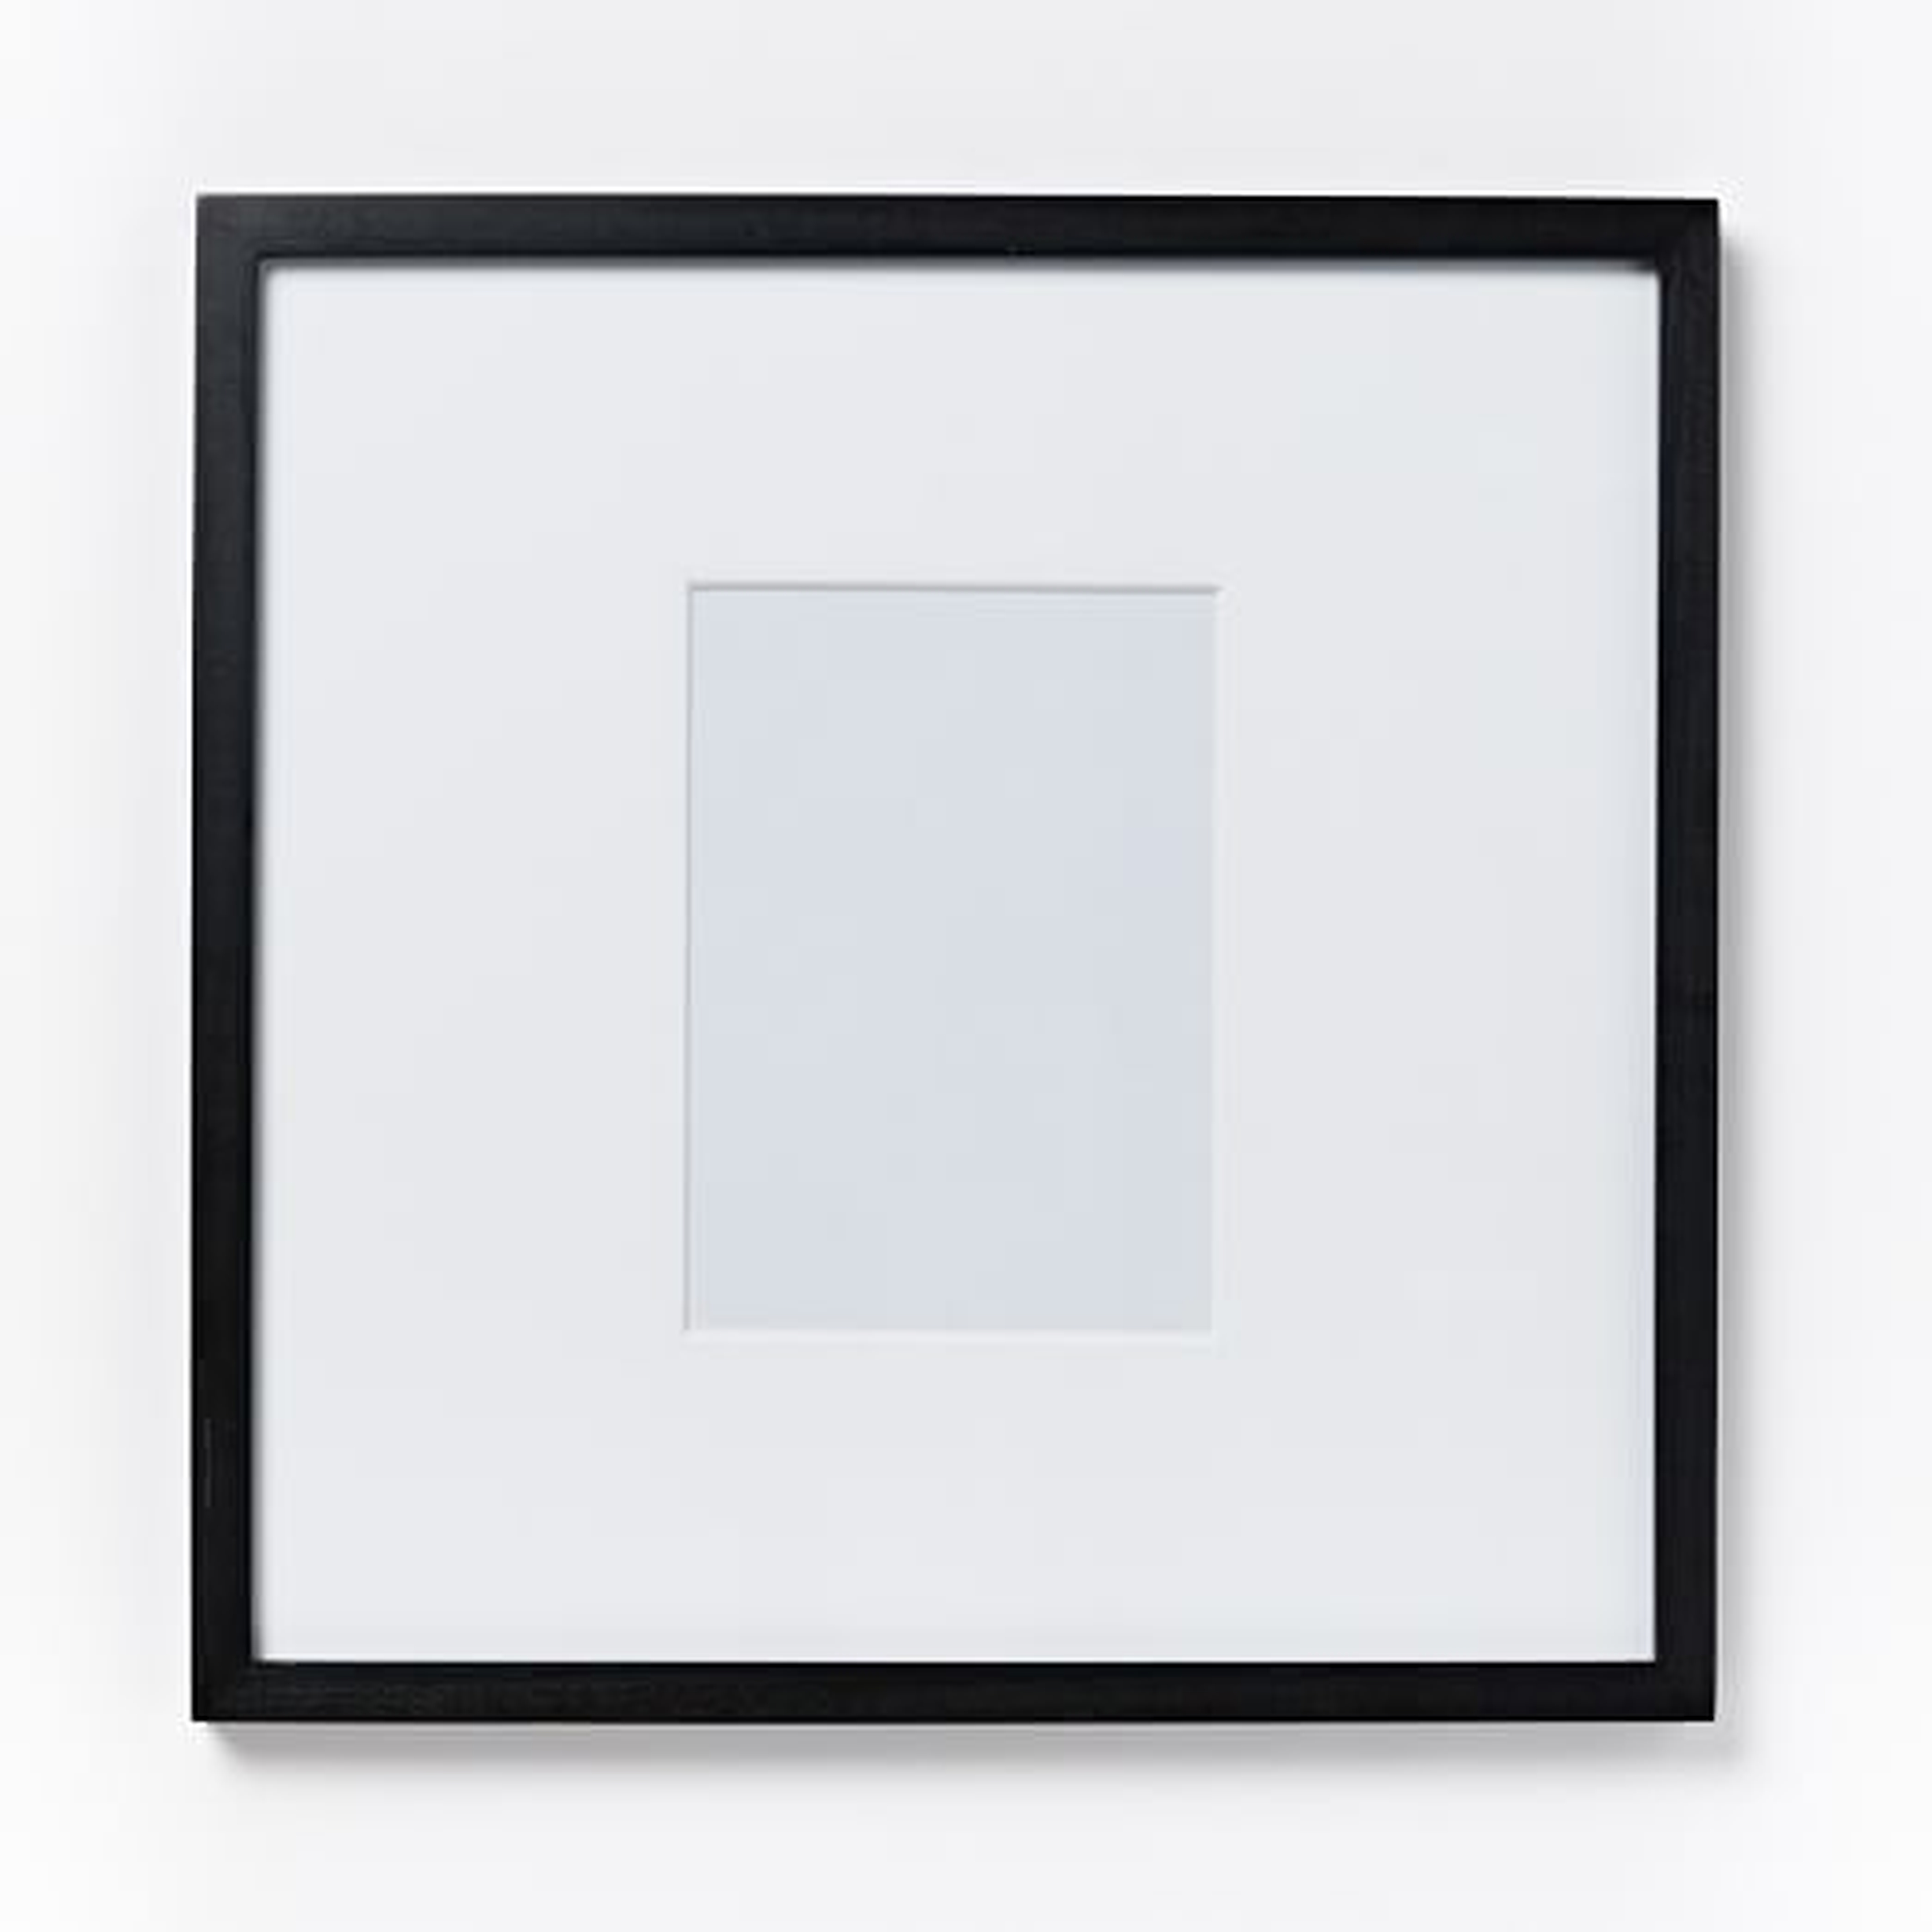 Gallery Frame, Black Lacquer, 4"x6" (17"x17" Frame) - West Elm